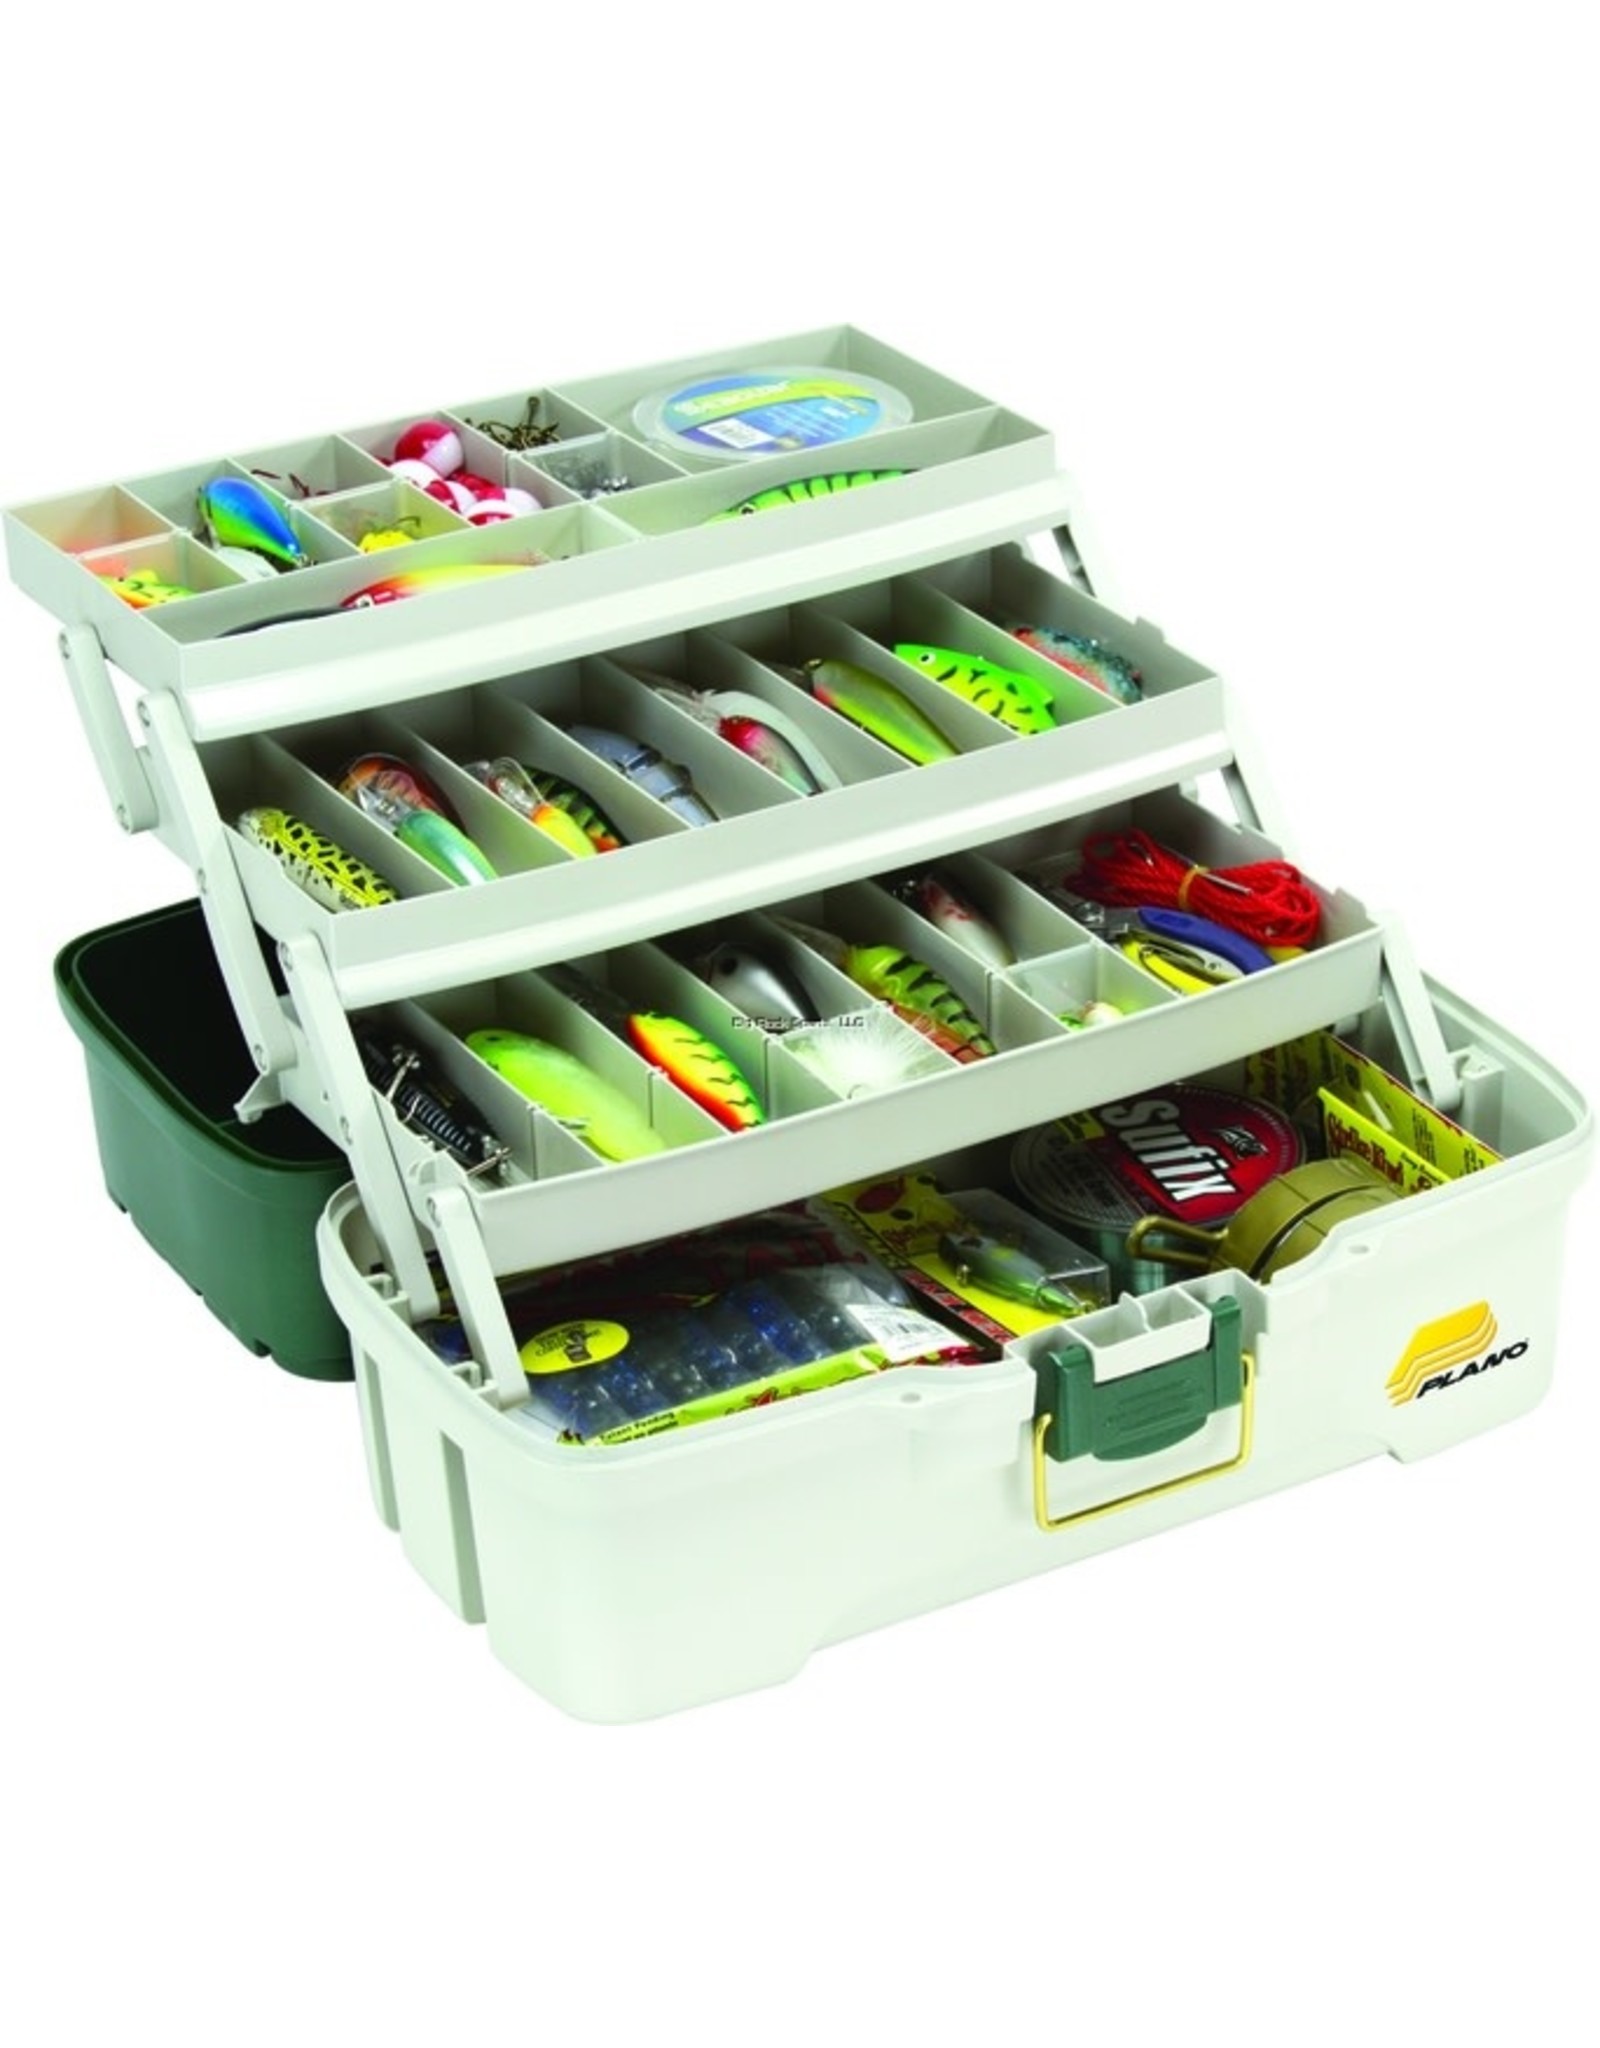 Plano Plano 620306 3 Tray Tackle Box w/Dual Top Access Grn Met/Off White